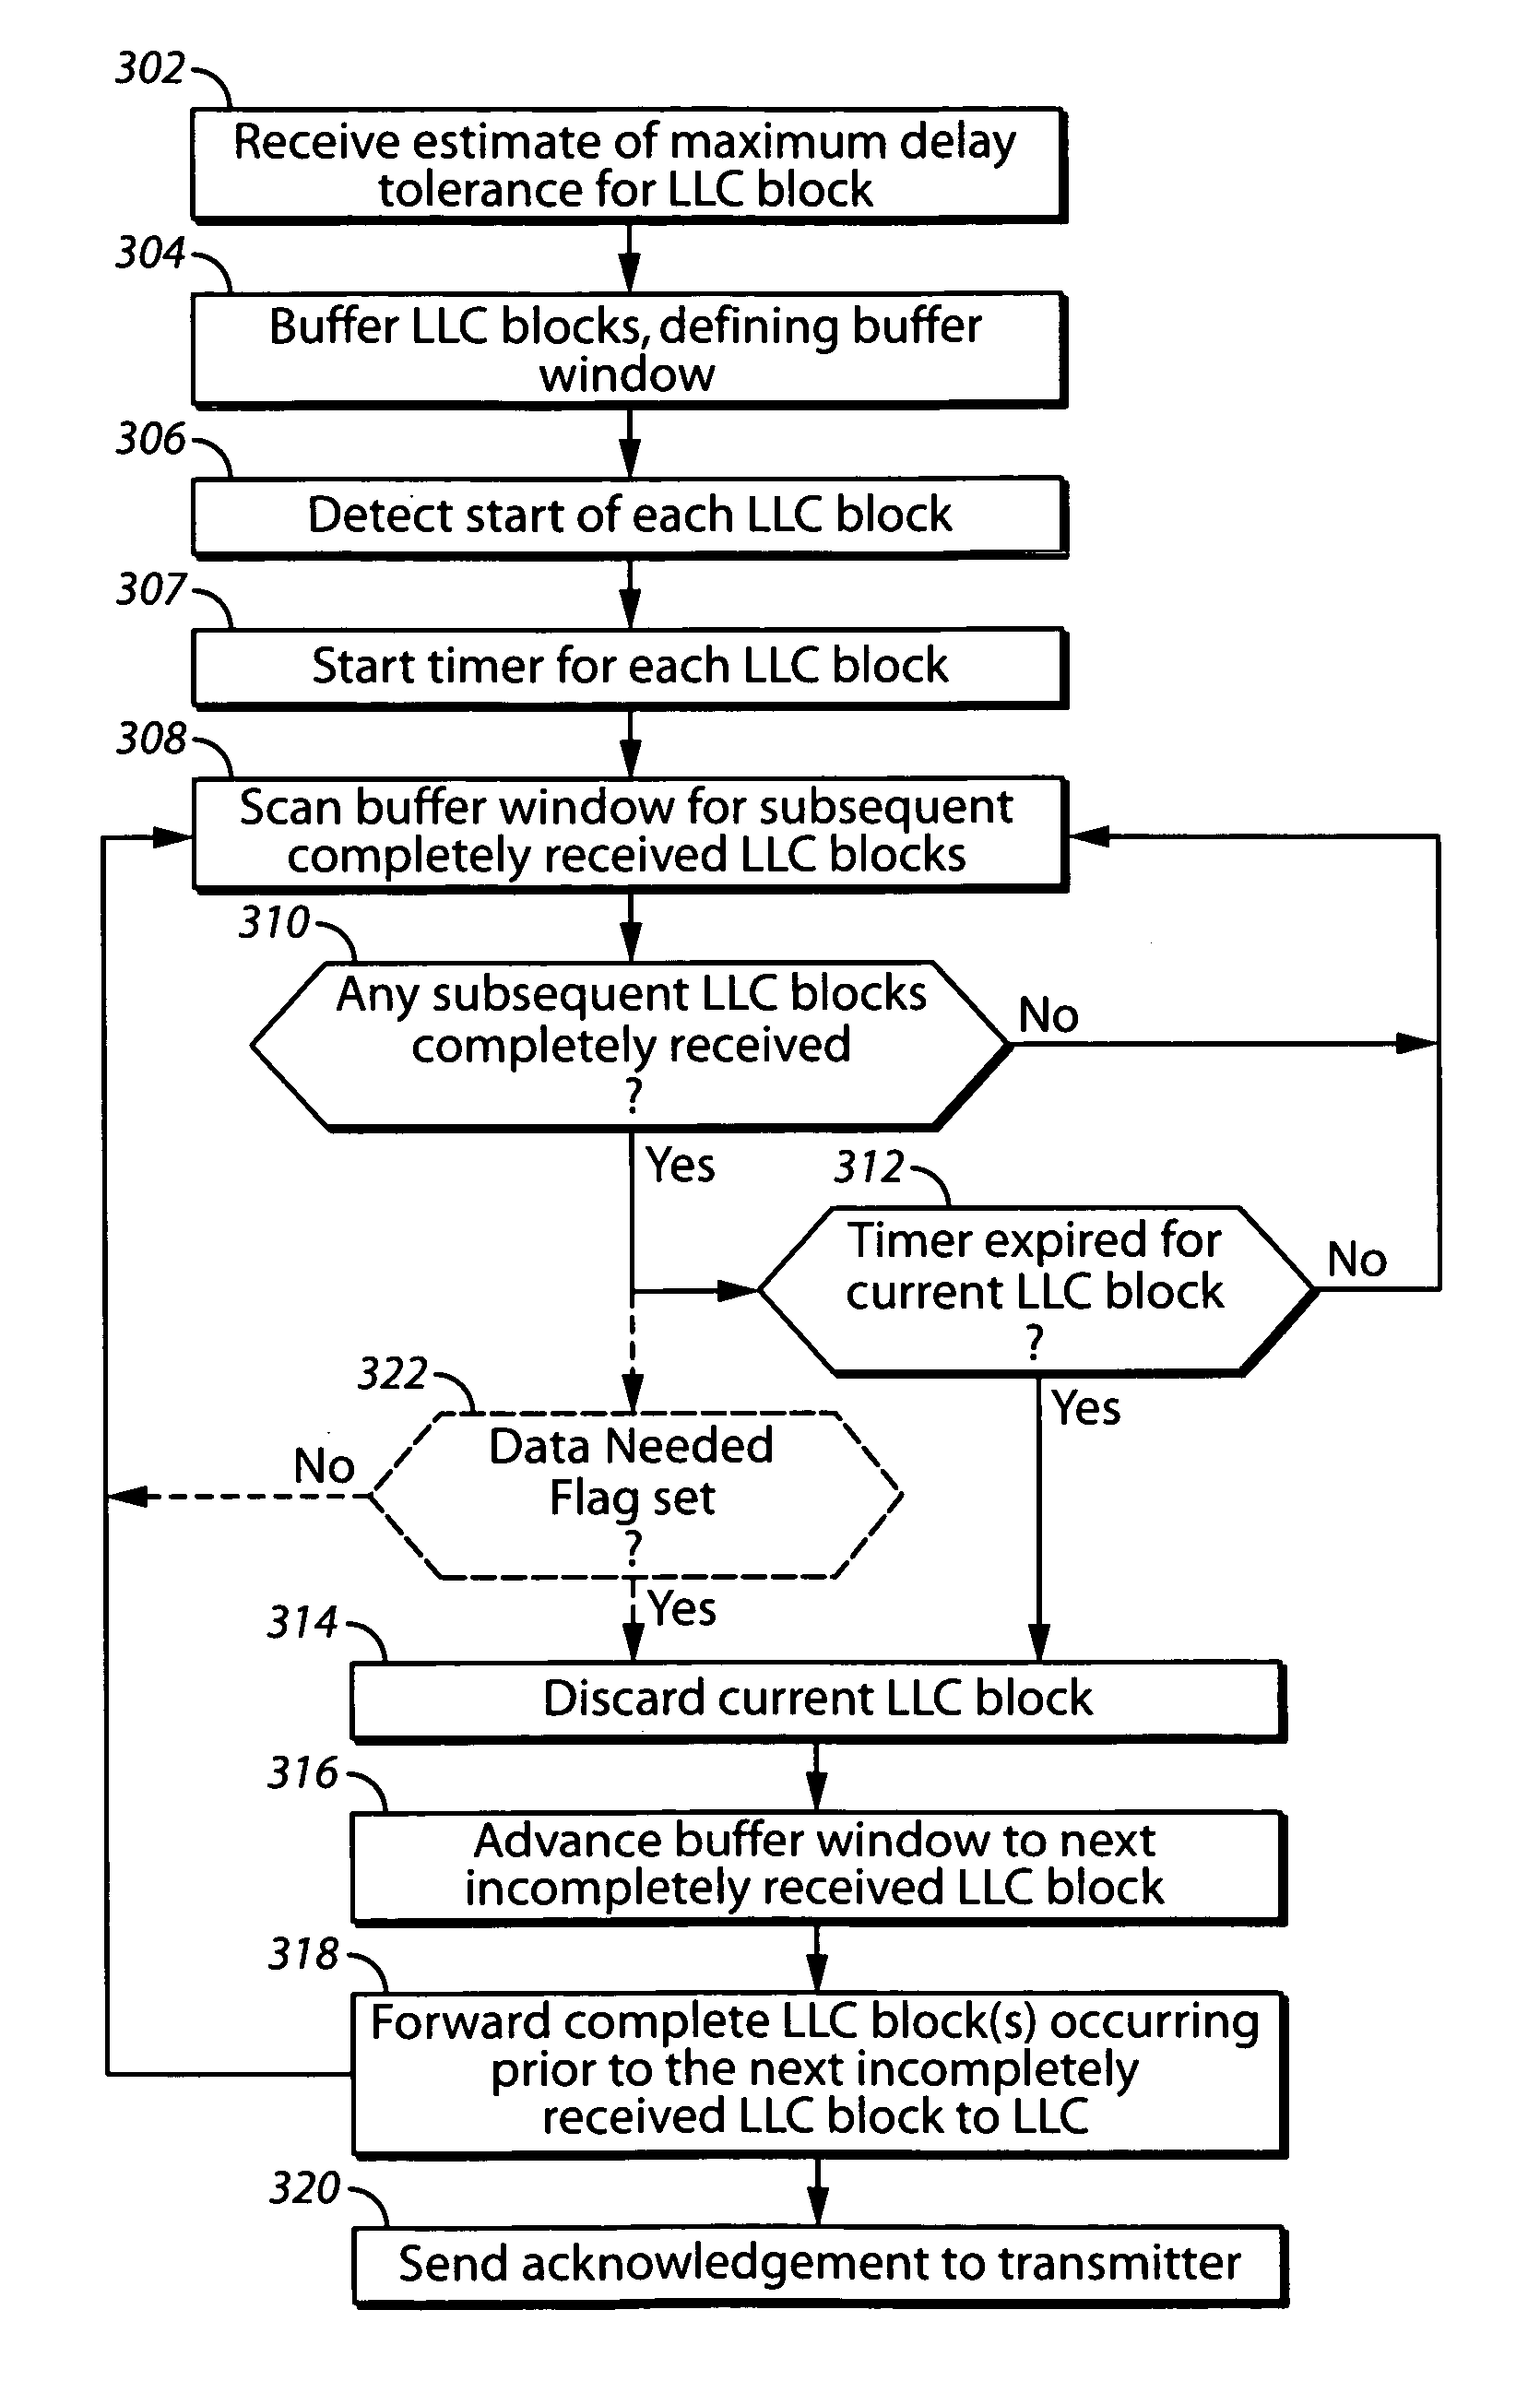 Method and apparatus for modulating radio link control (RLC) ACK/NAK persistence to improve performance of data traffic